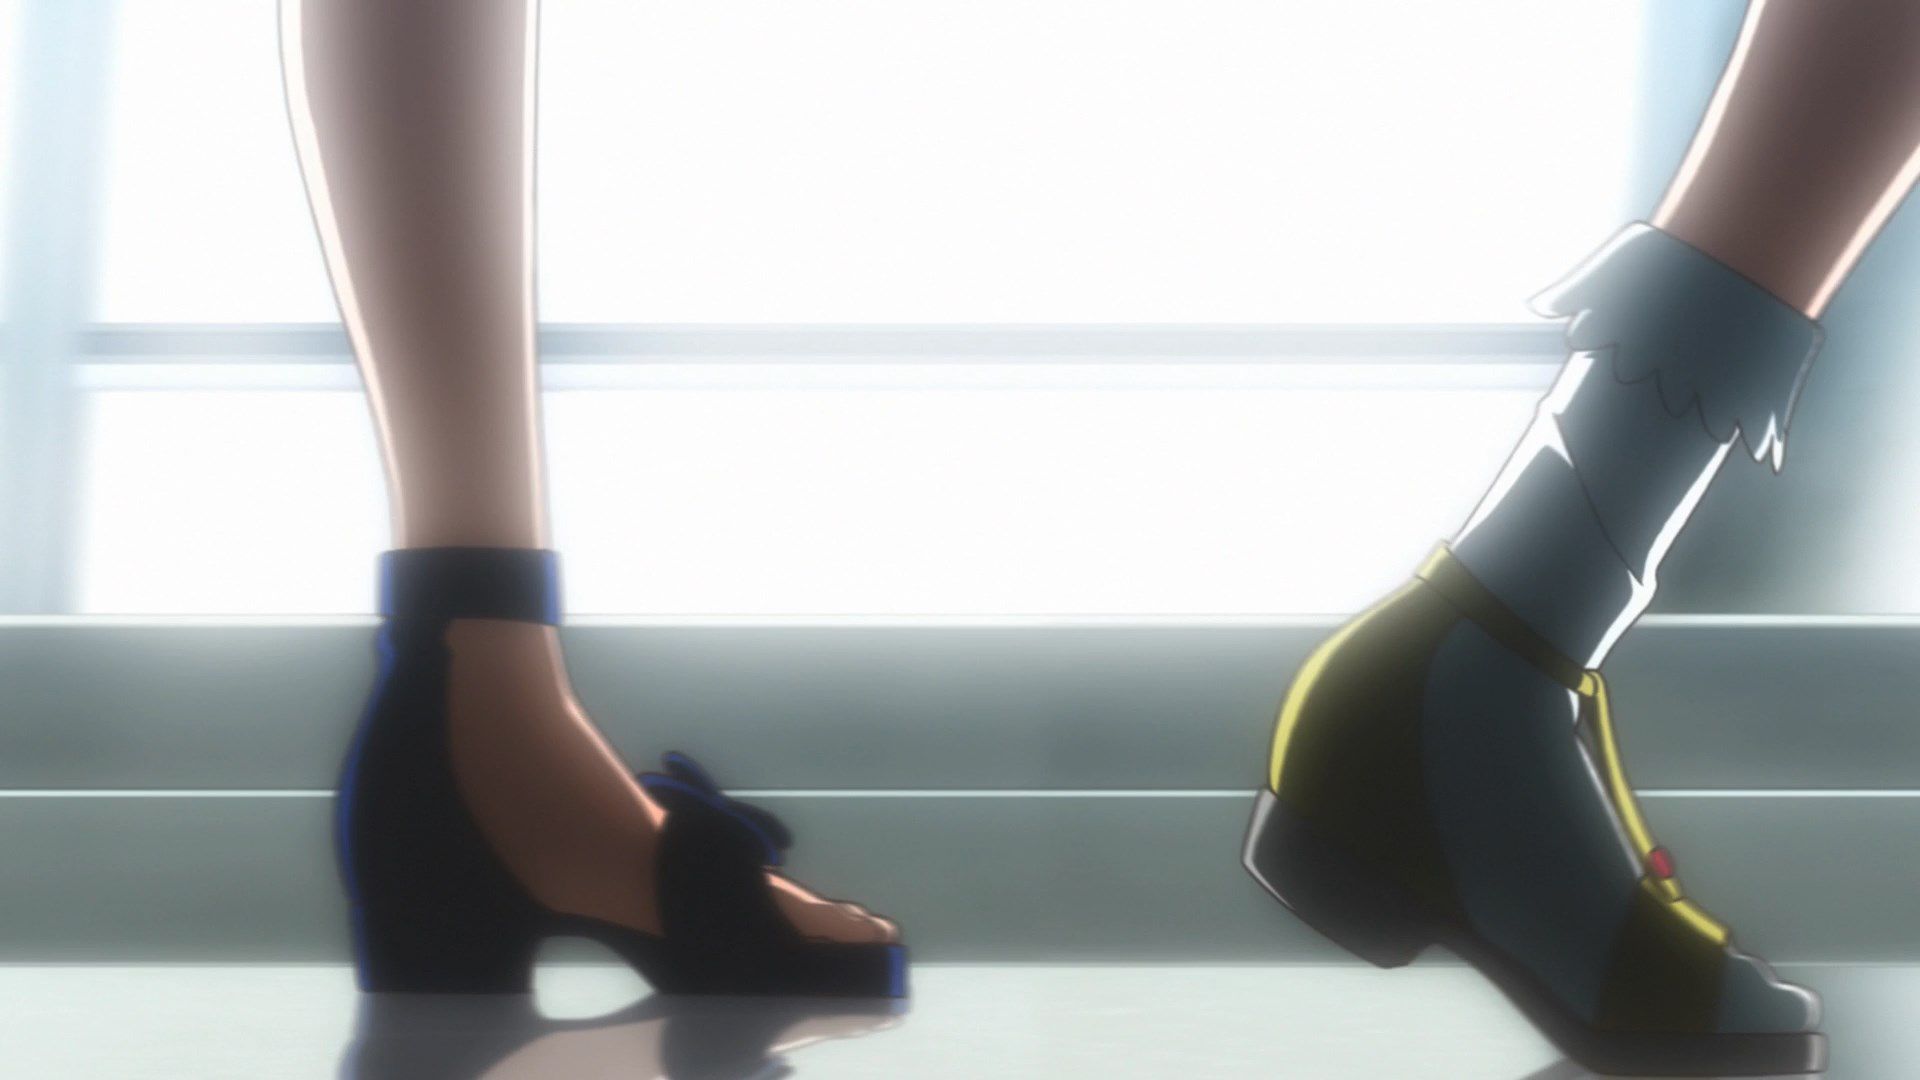 [God images] "love live! ' Μm ' PV's leg is too erotic everyone wakes up to a leg fetish of wwwww 20